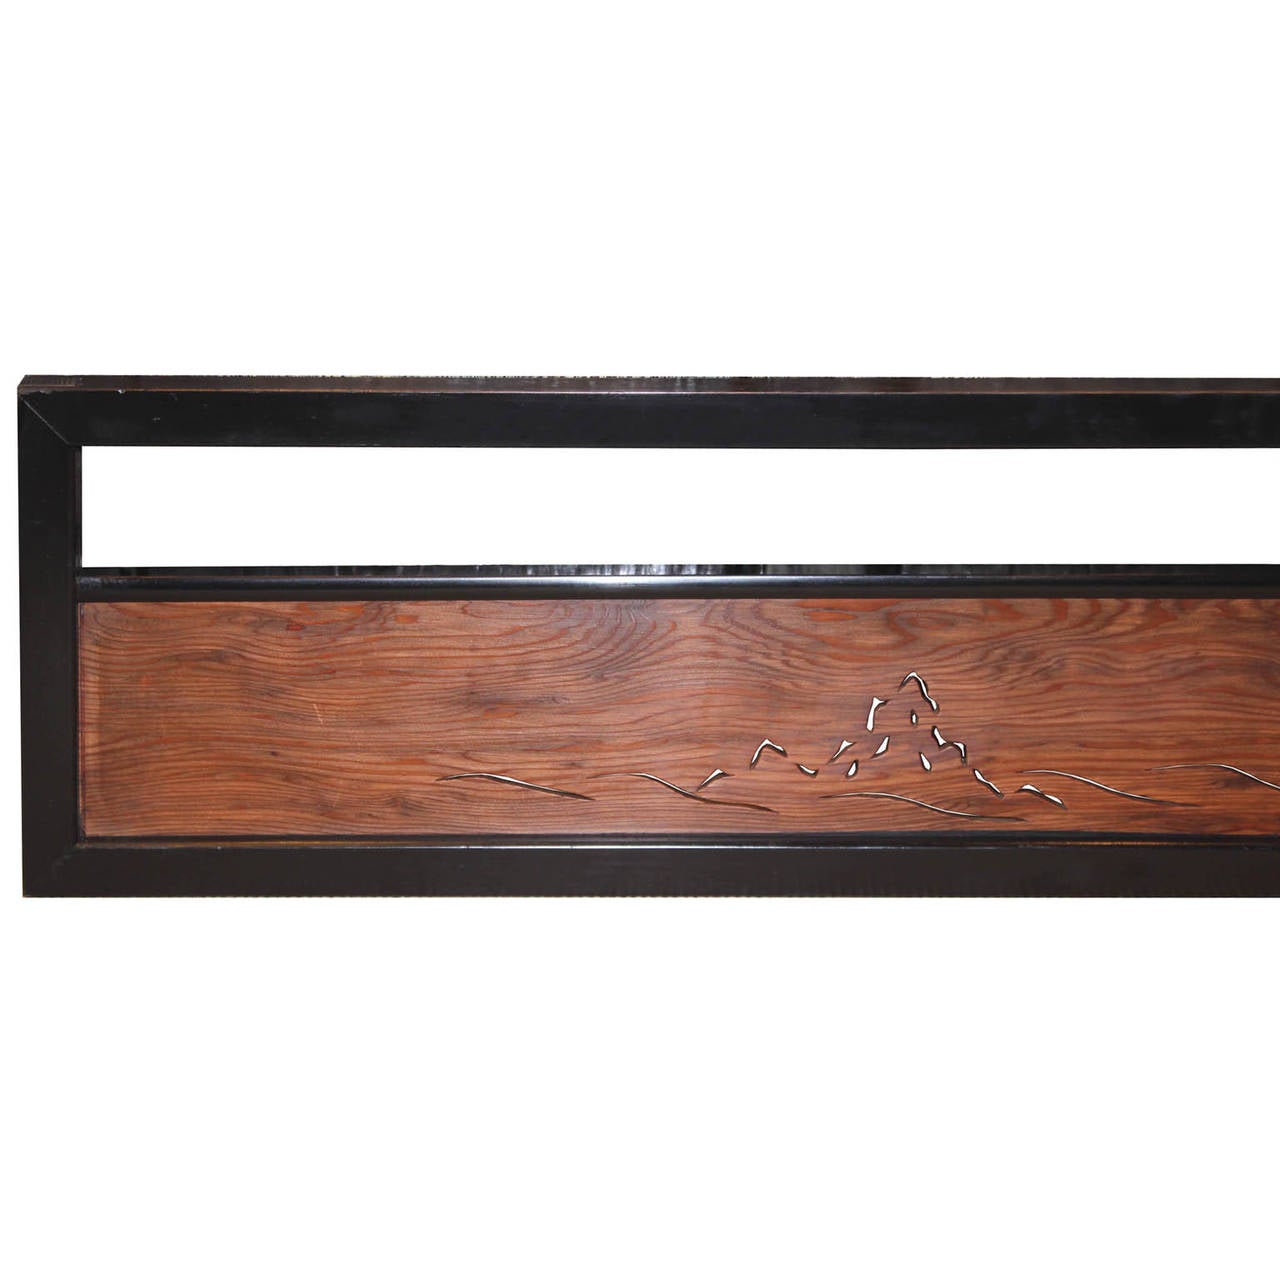 Vintage Japanese sugi wood (cedar) ranma (transom) with black lacquer frame.  With hand-carved long life turtle swimming in the waves.  Transoms were originally used in between rooms above doorways as decorative elements.  Taisho period, circa 1920s.